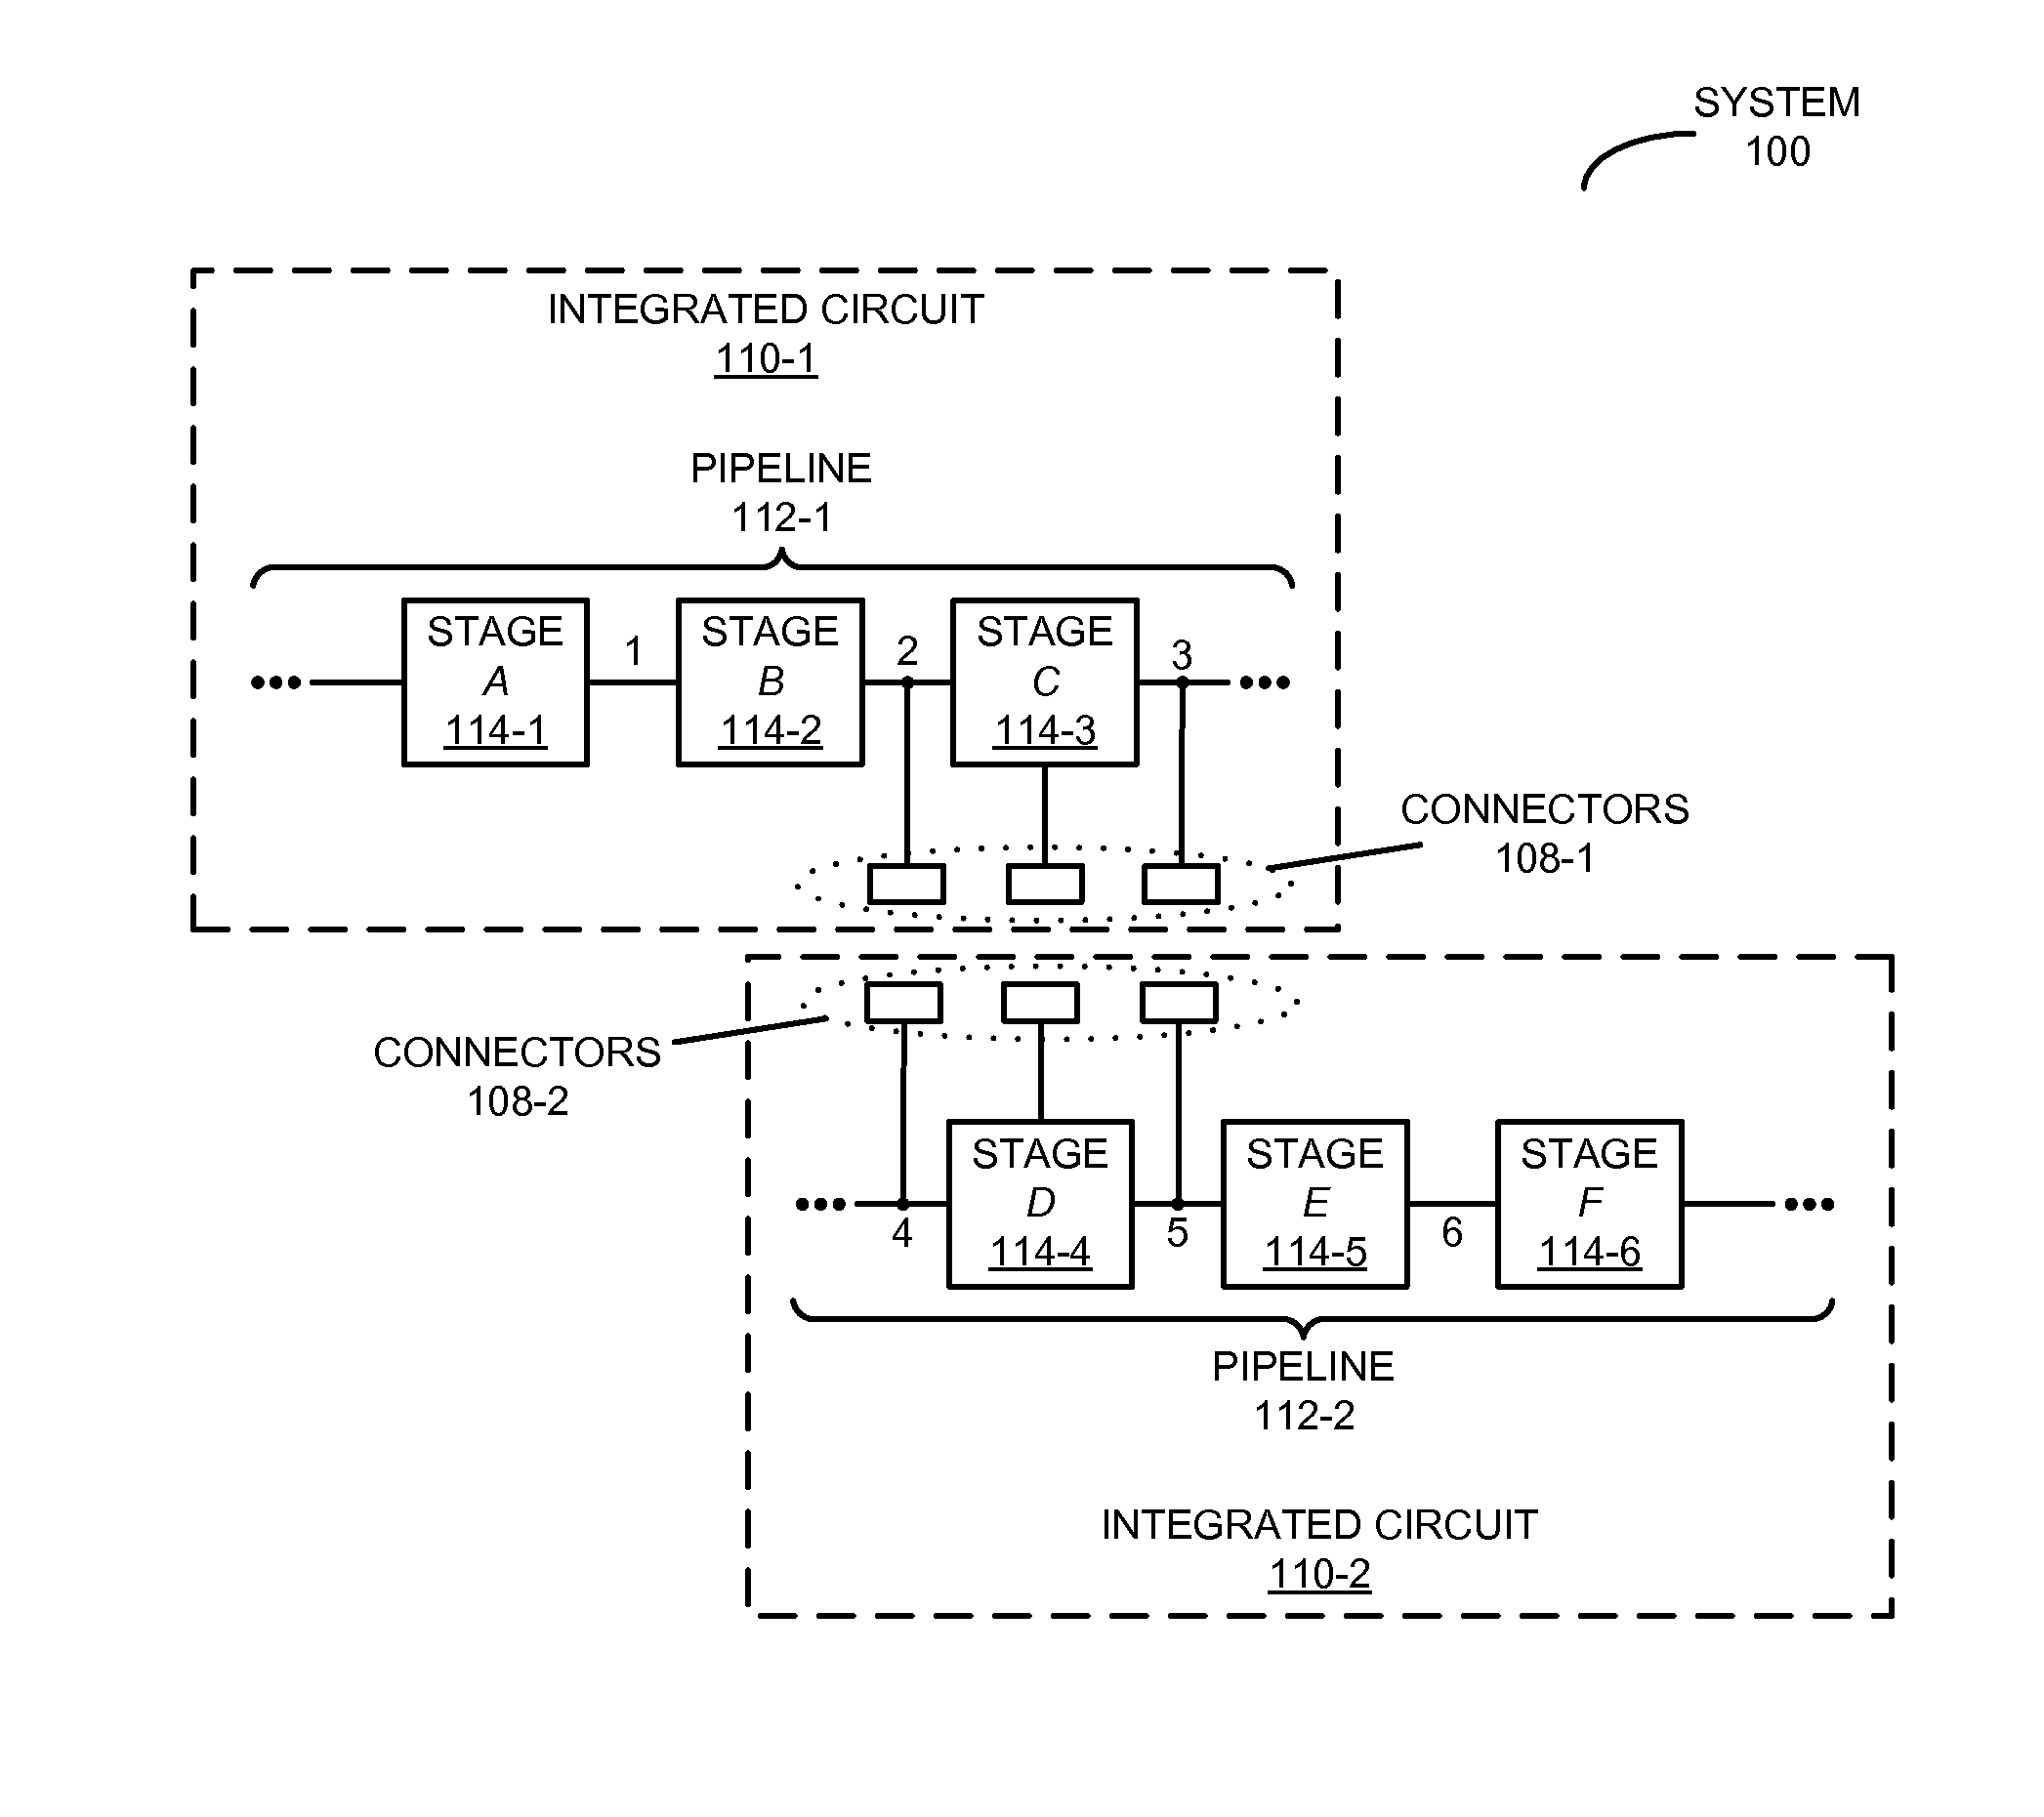 Synchronizing timing of communication between integrated circuits